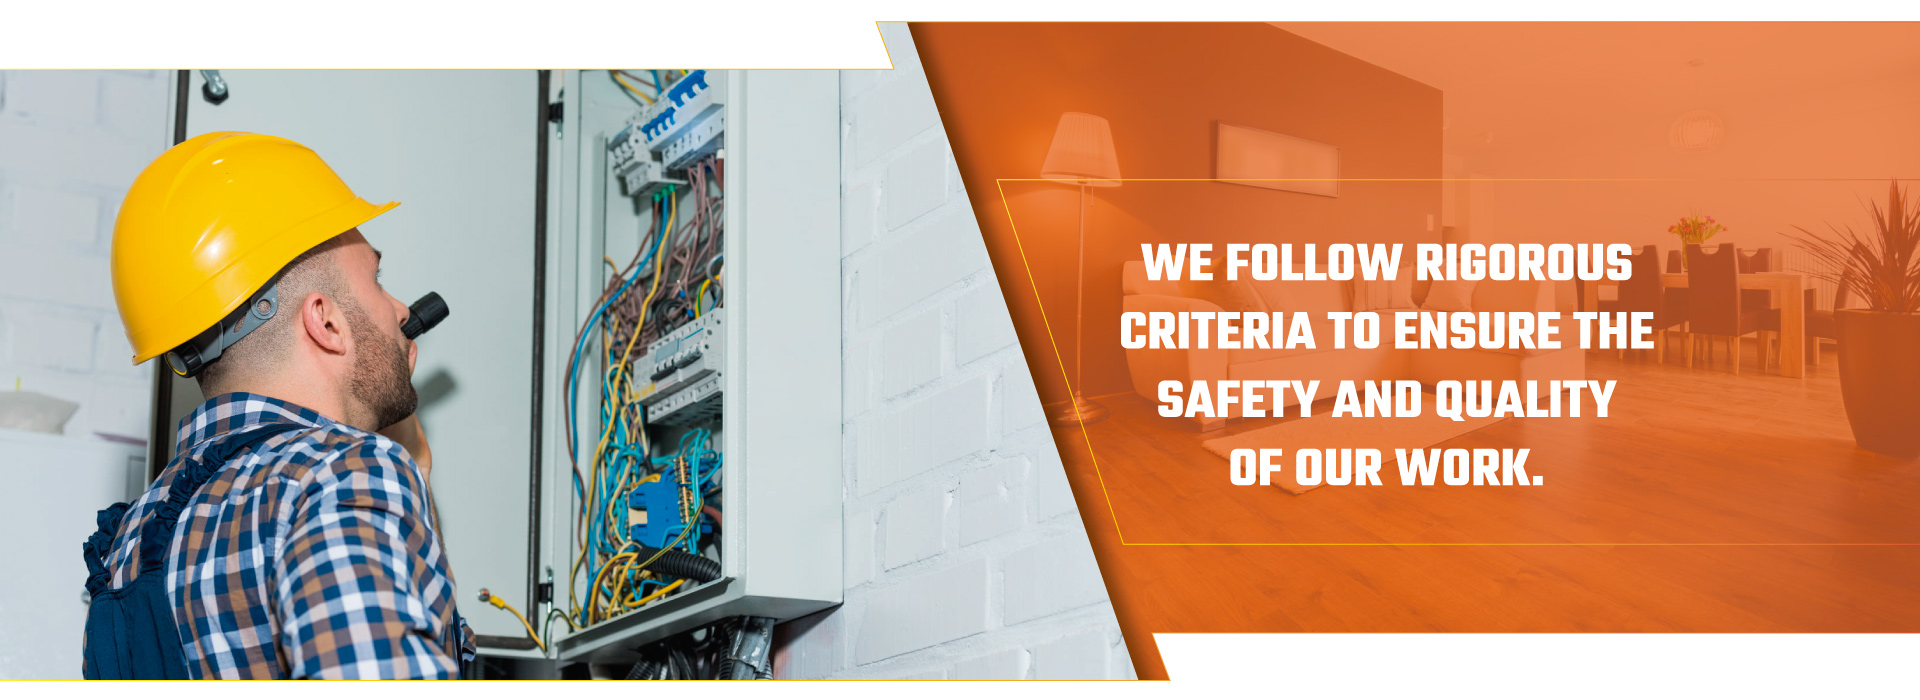 We follow rigorous criteria to ensure the safety and queality of our work